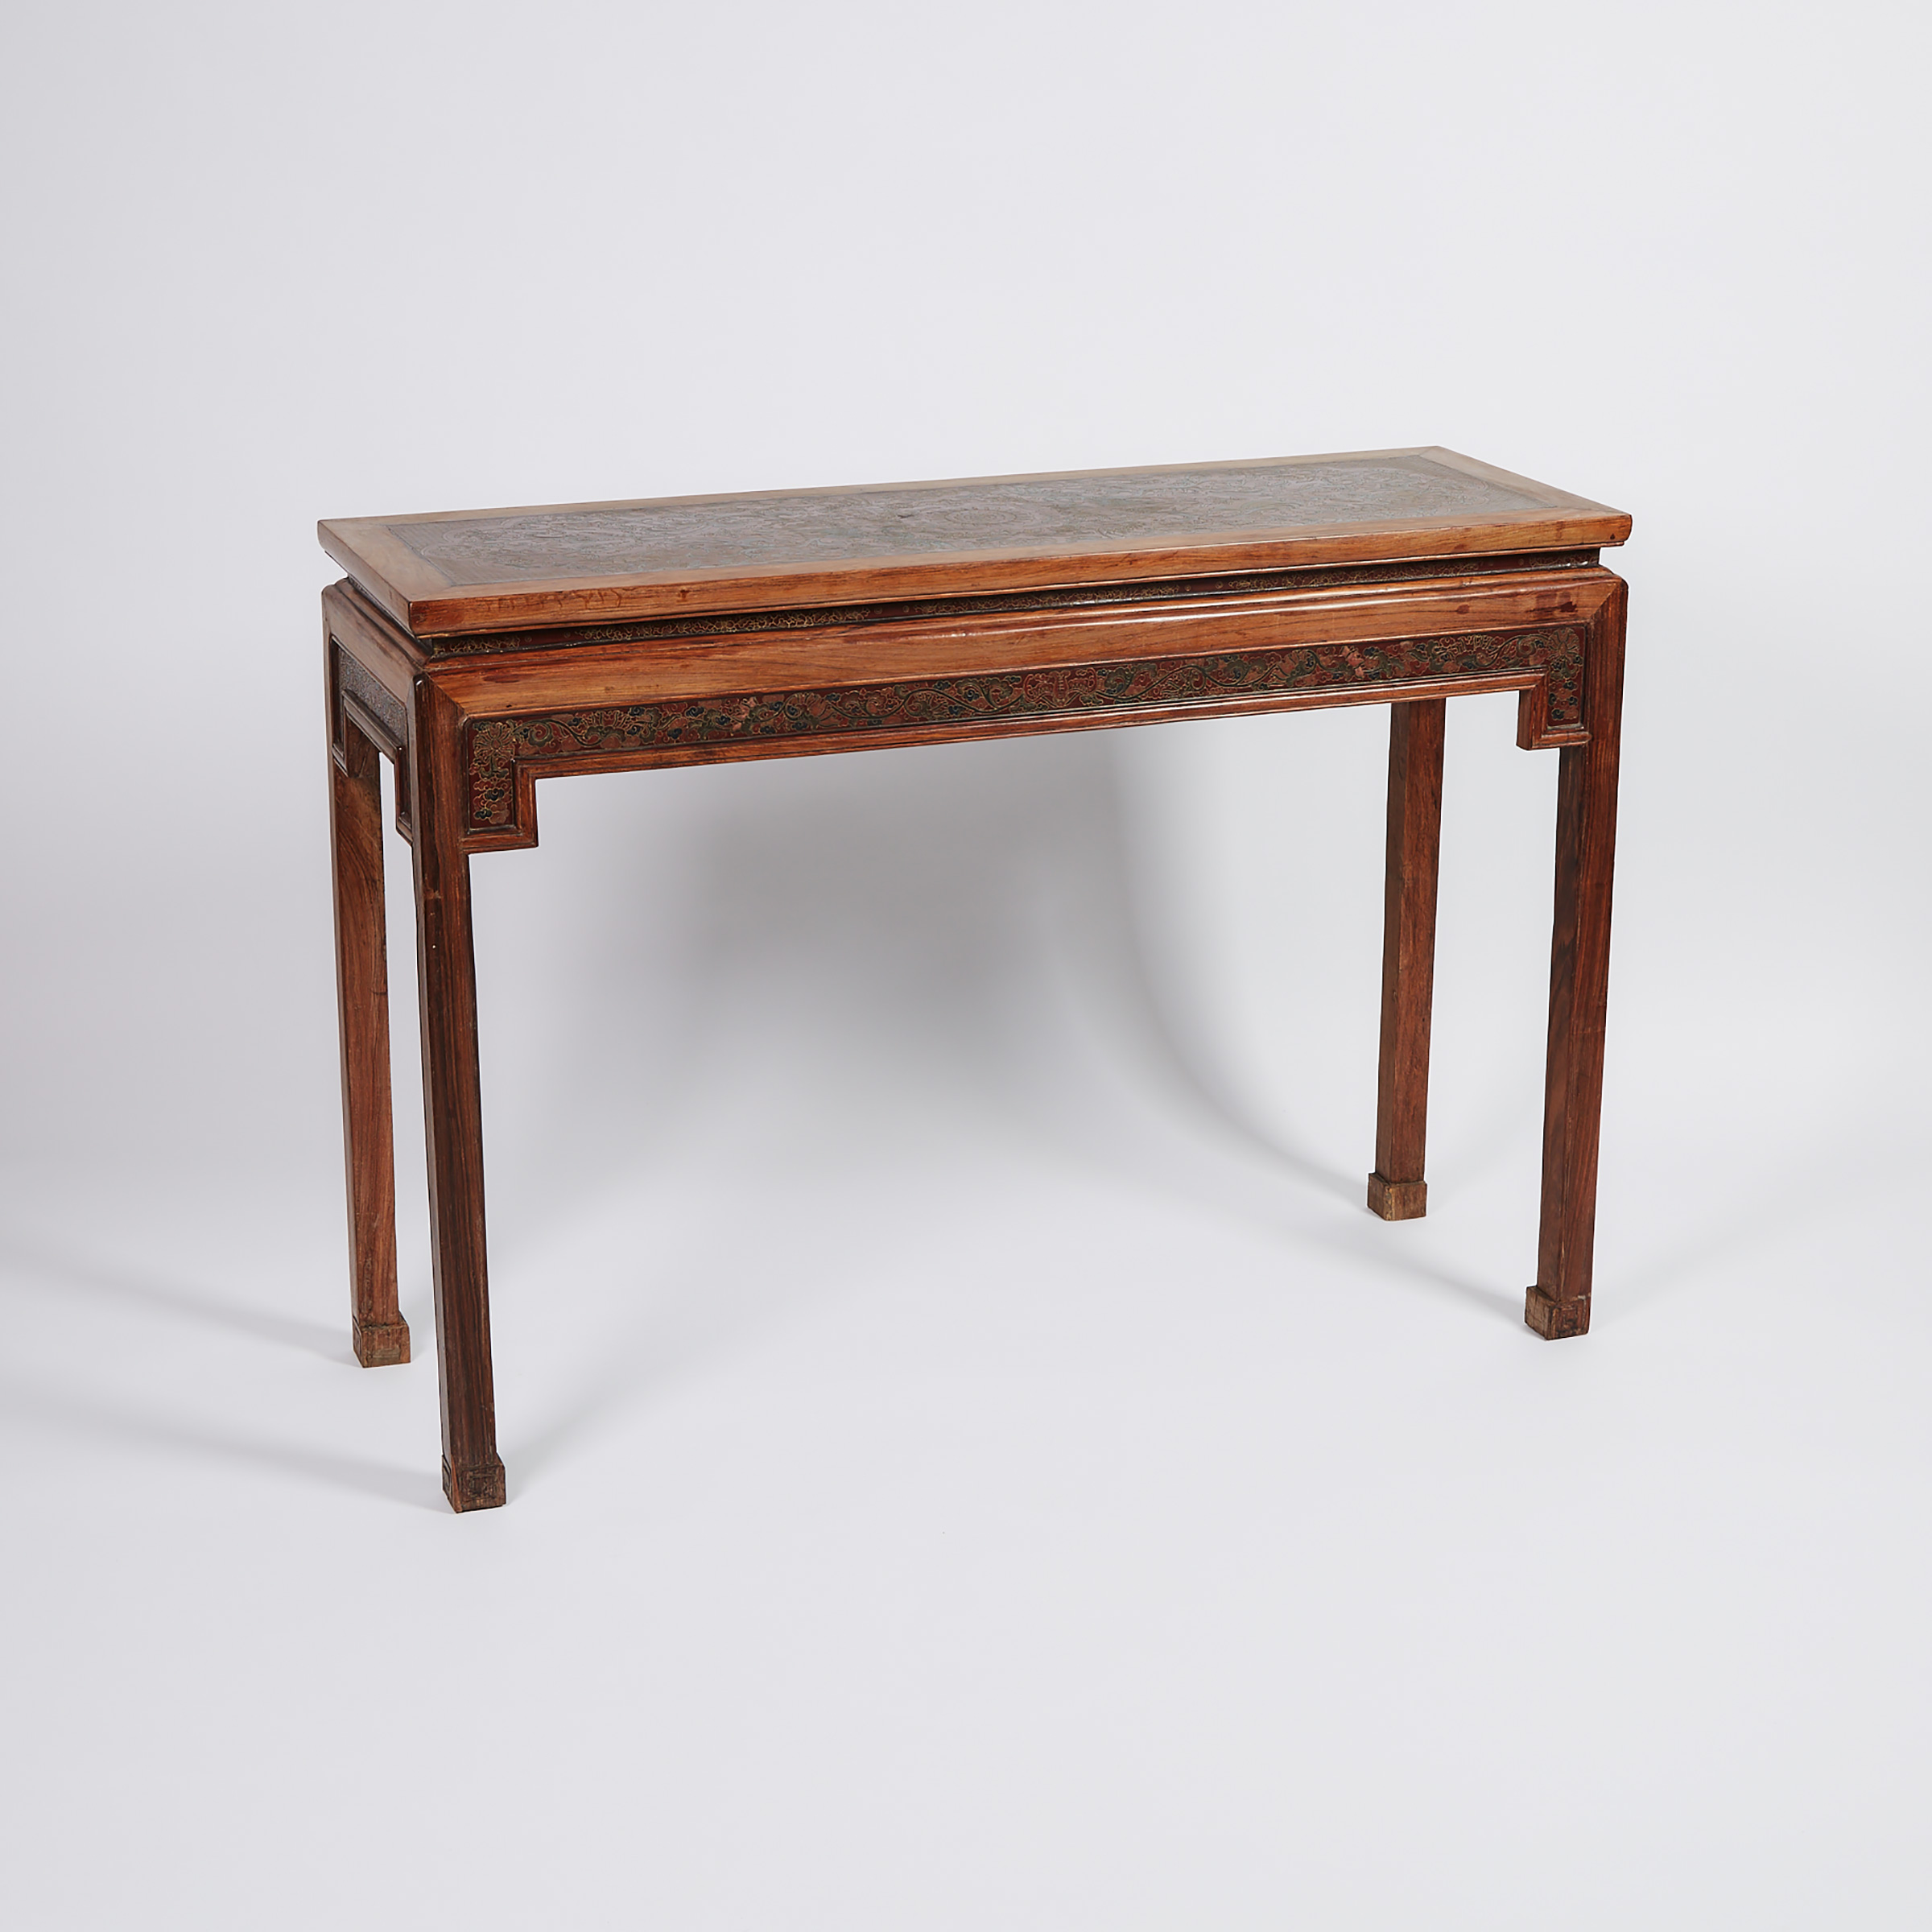 A Hardwood Carved and Lacquered Top Long Table